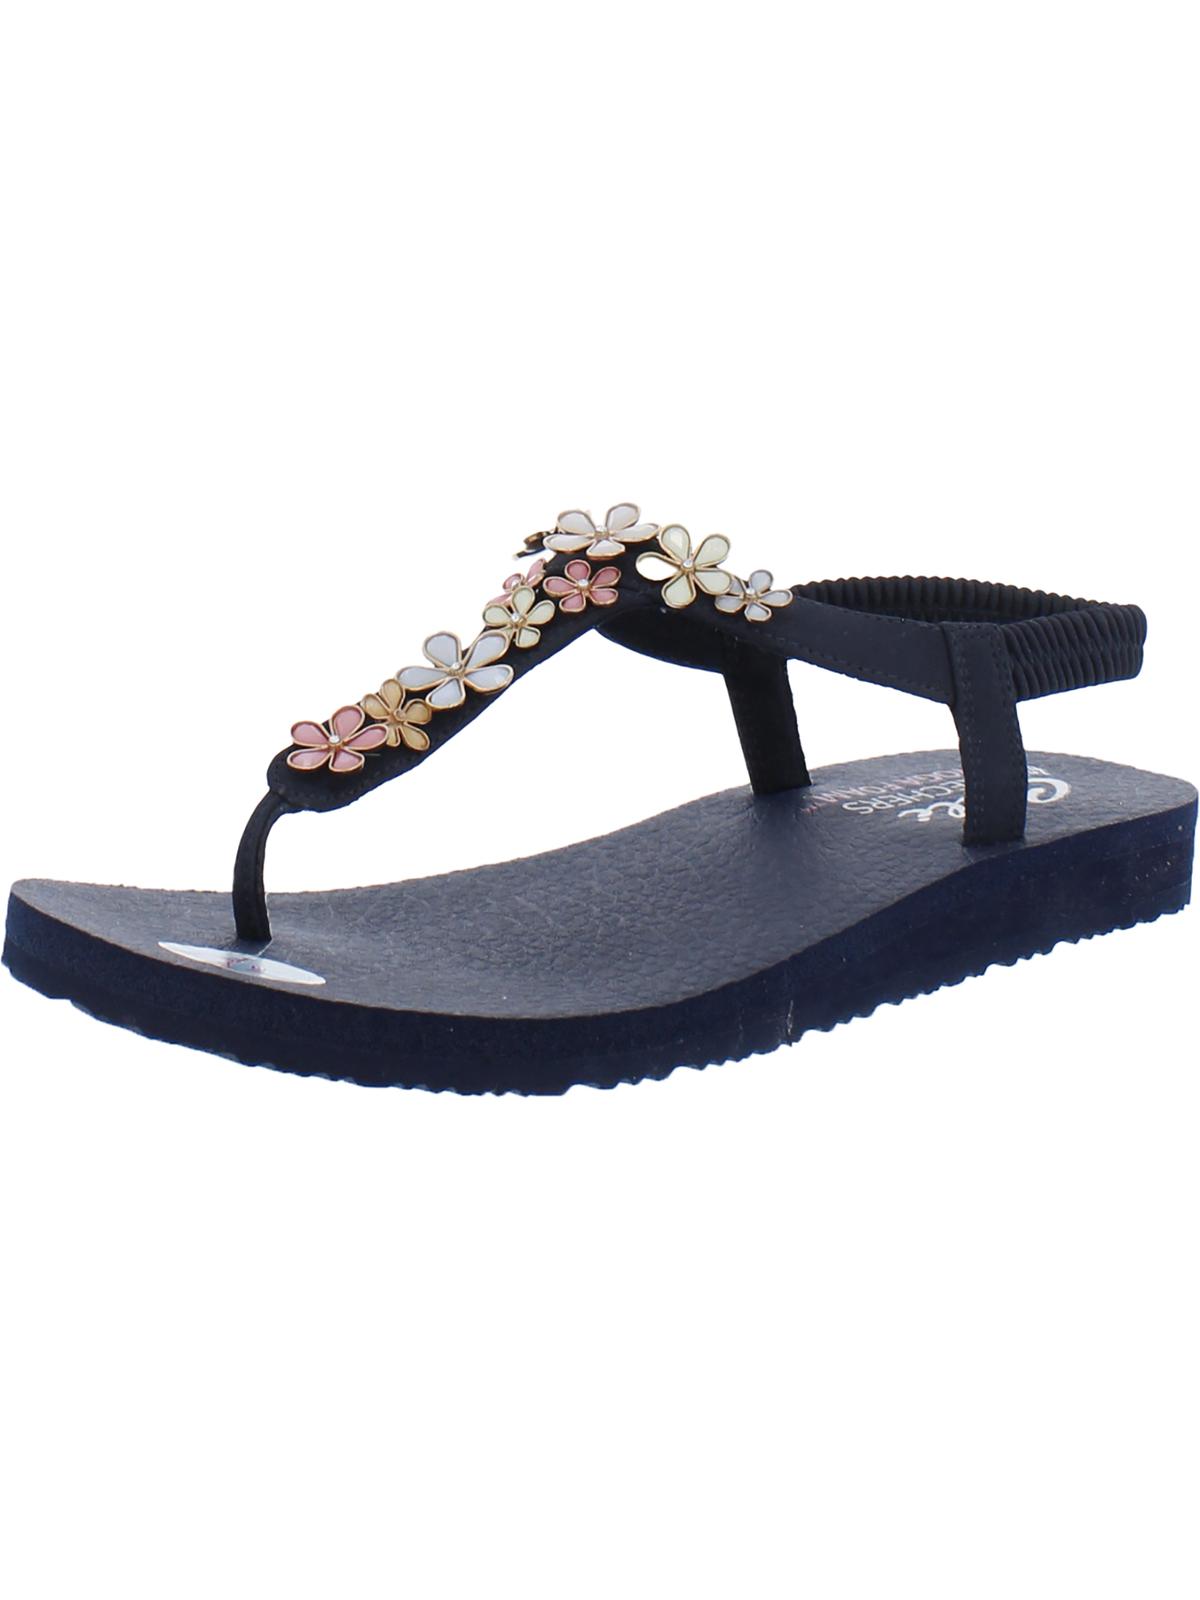 SKECHERS Meditation- Glass Daisy Womens Embellished Ankle Strap Thong Sandals